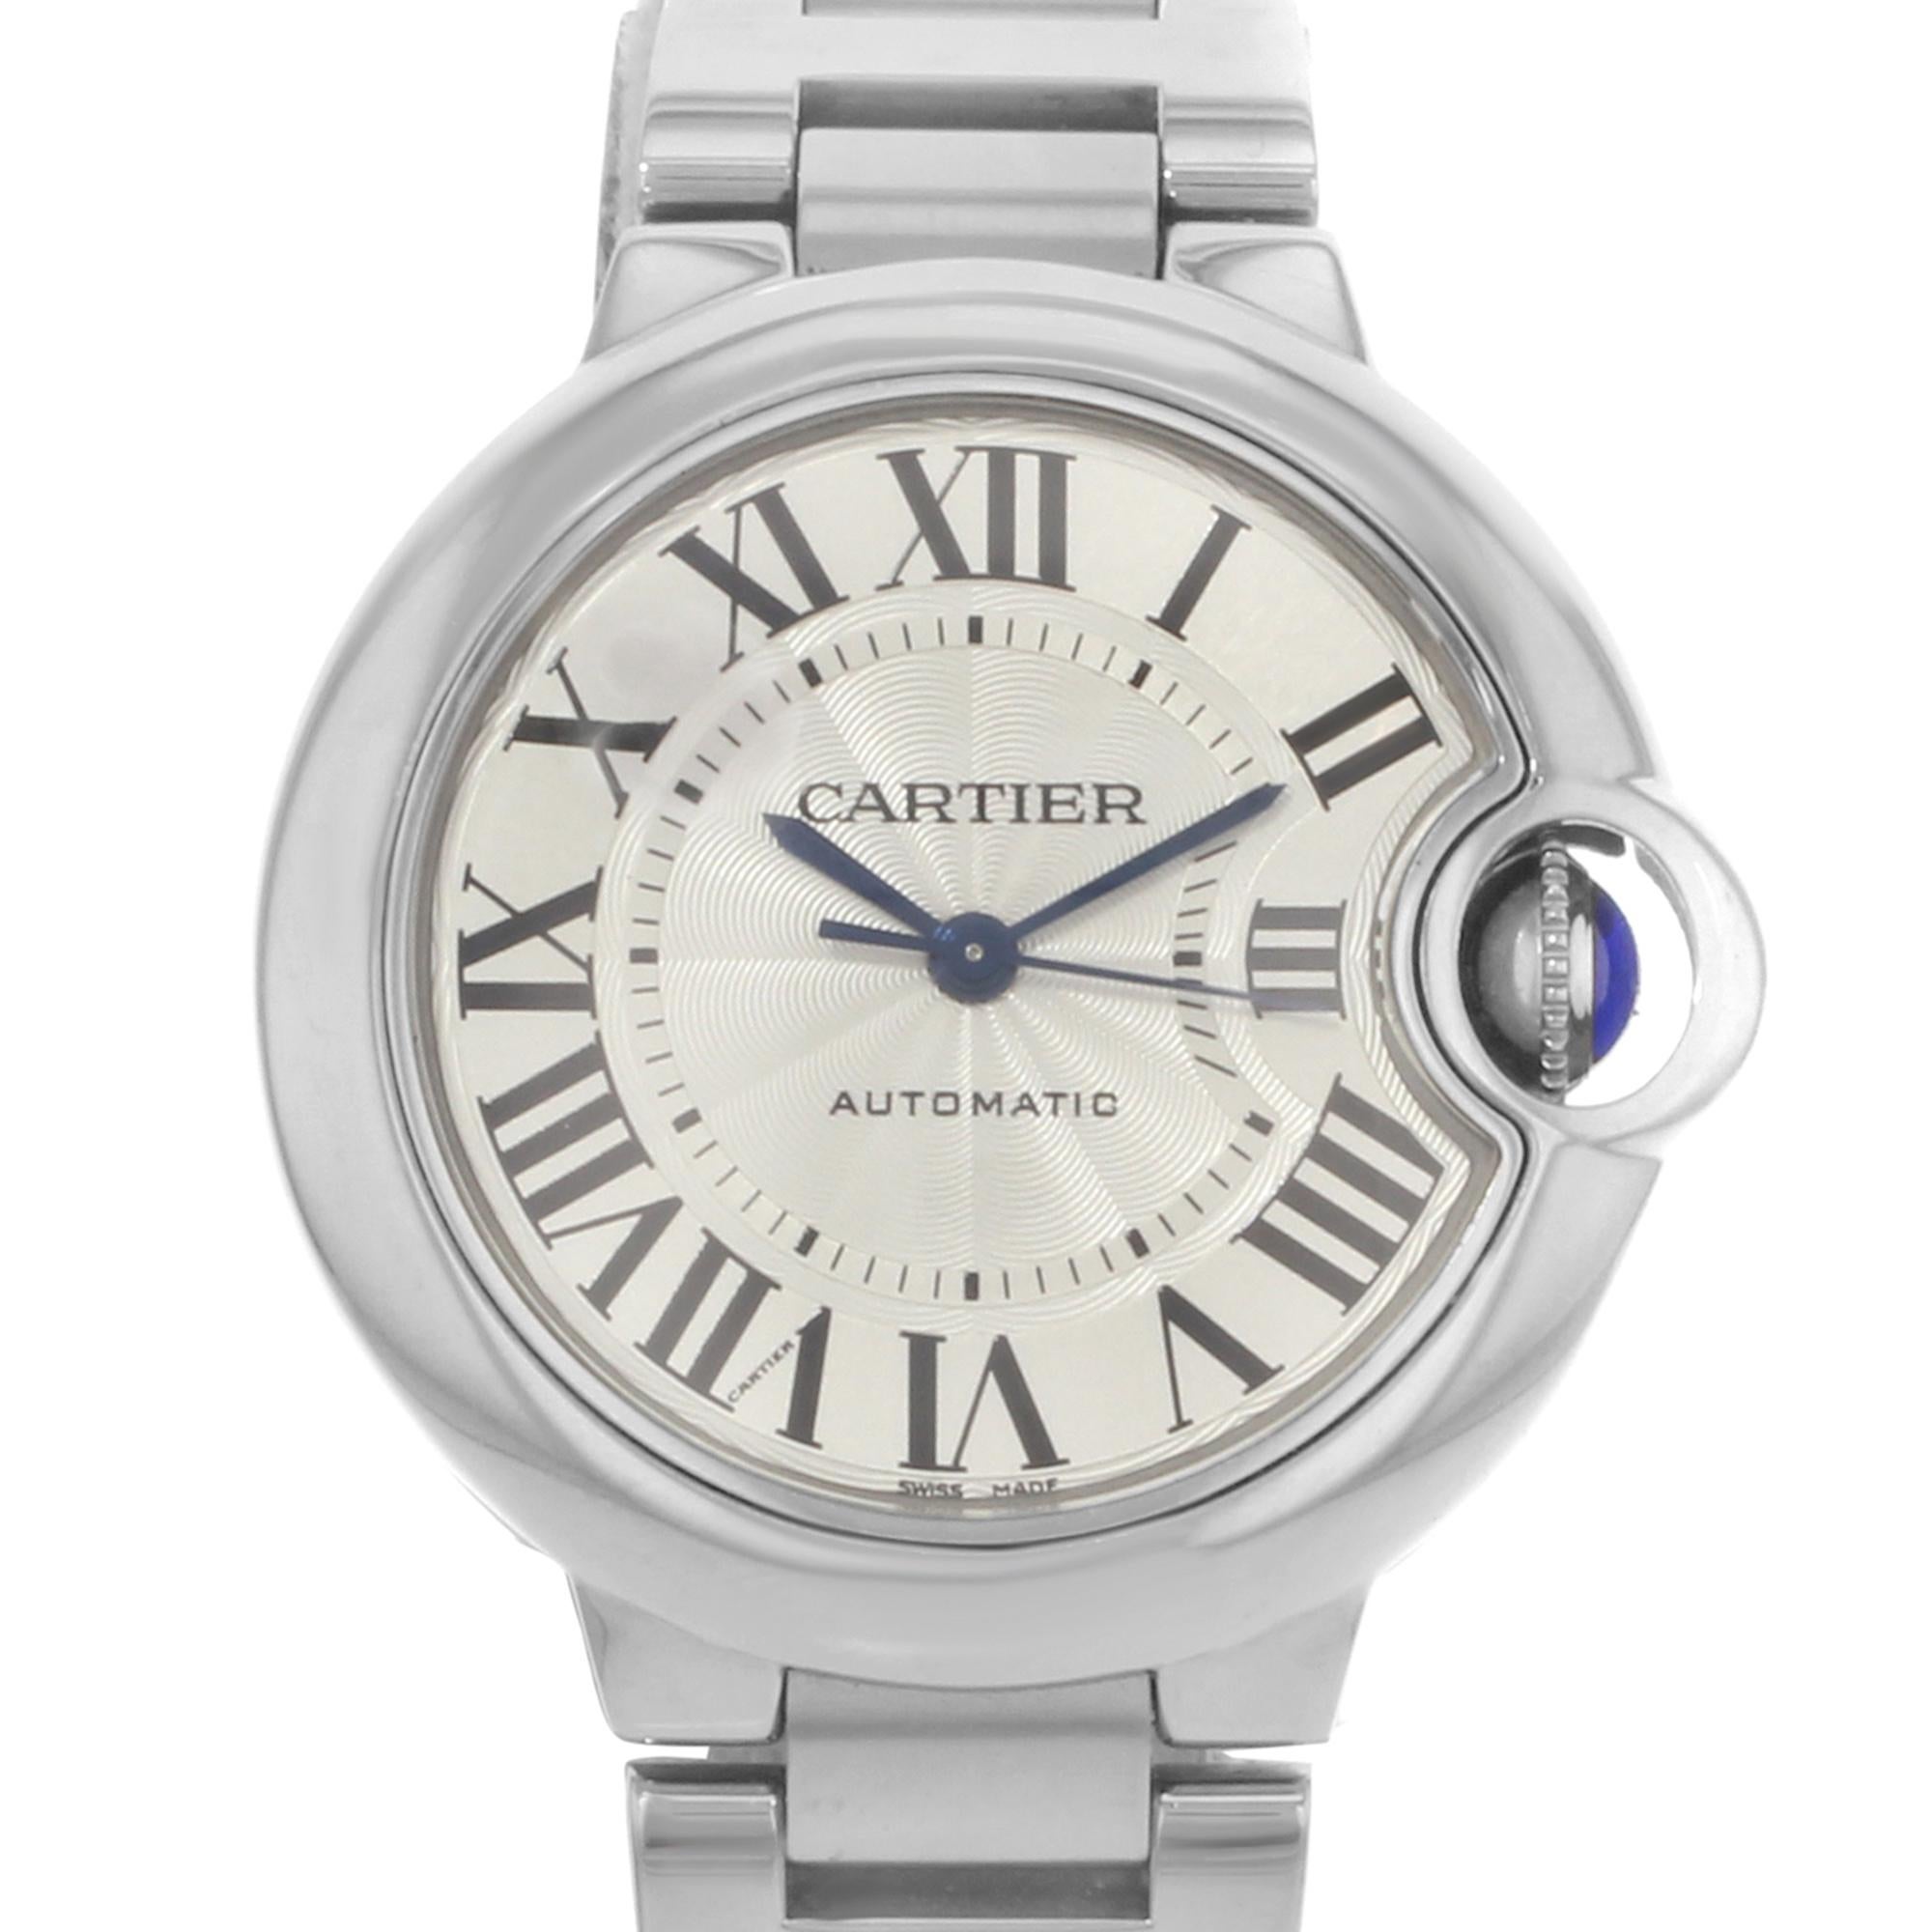 This pre-owned Cartier Ballon Bleu W6920071 is a beautiful Ladie's timepiece that is powered by mechanical (automatic) movement which is cased in a stainless steel case. It has a round shape face, no features dial and has hand roman numerals style